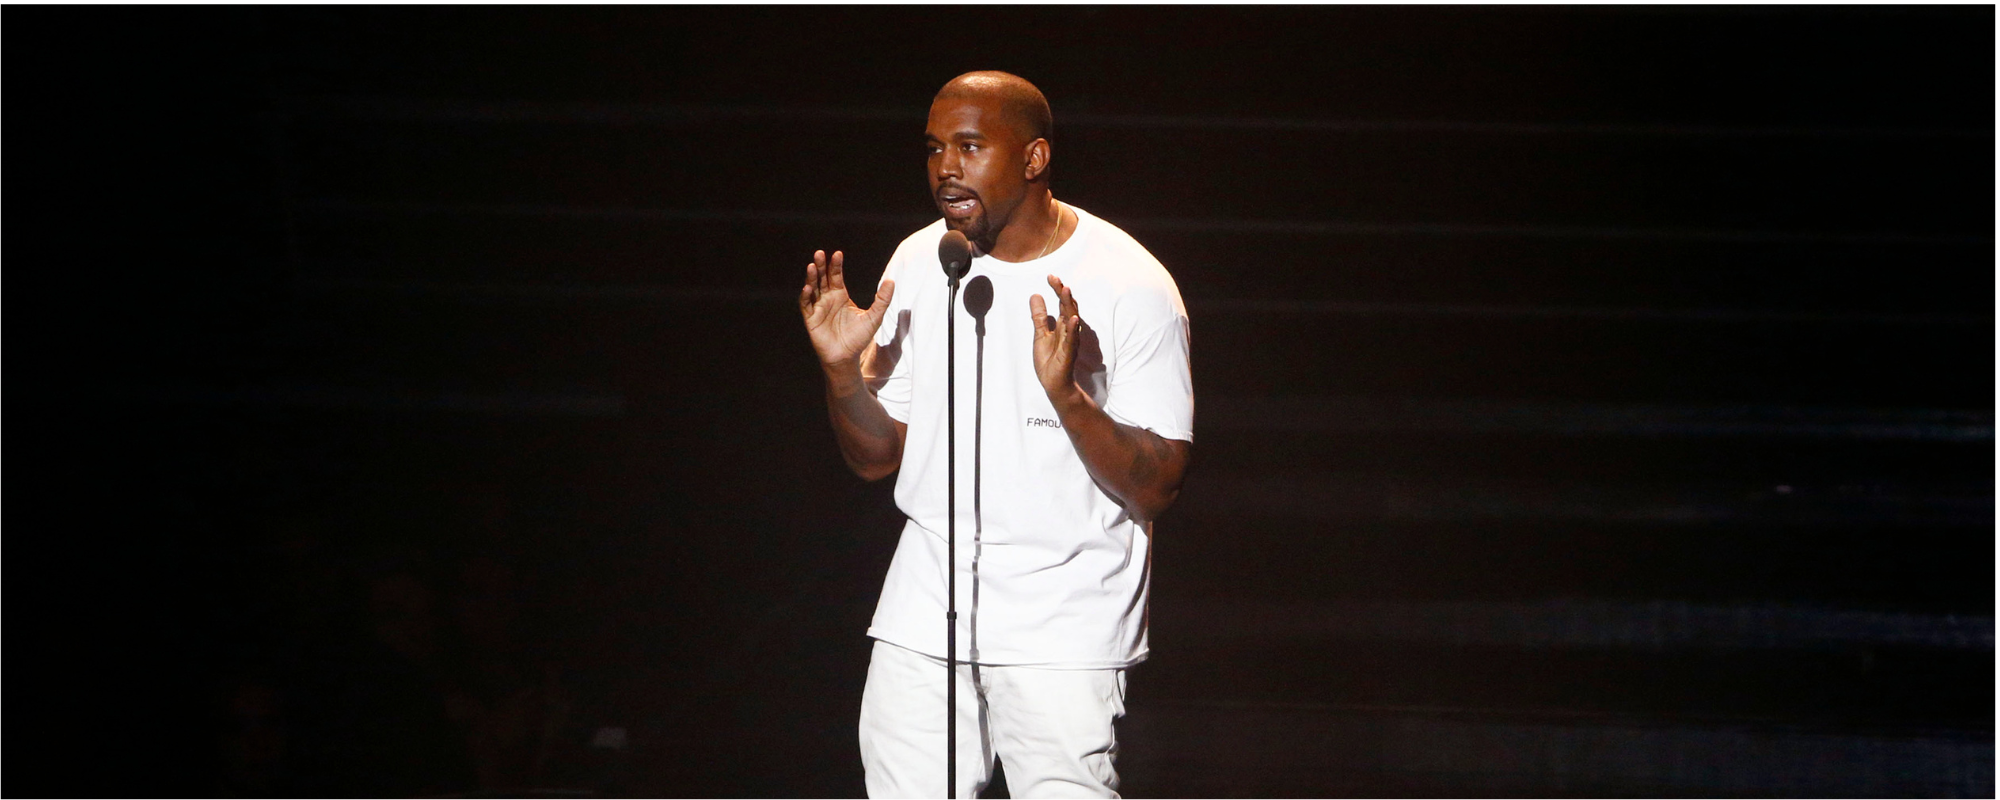 What Should We Expect from Kanye West’s Album Listening Event?